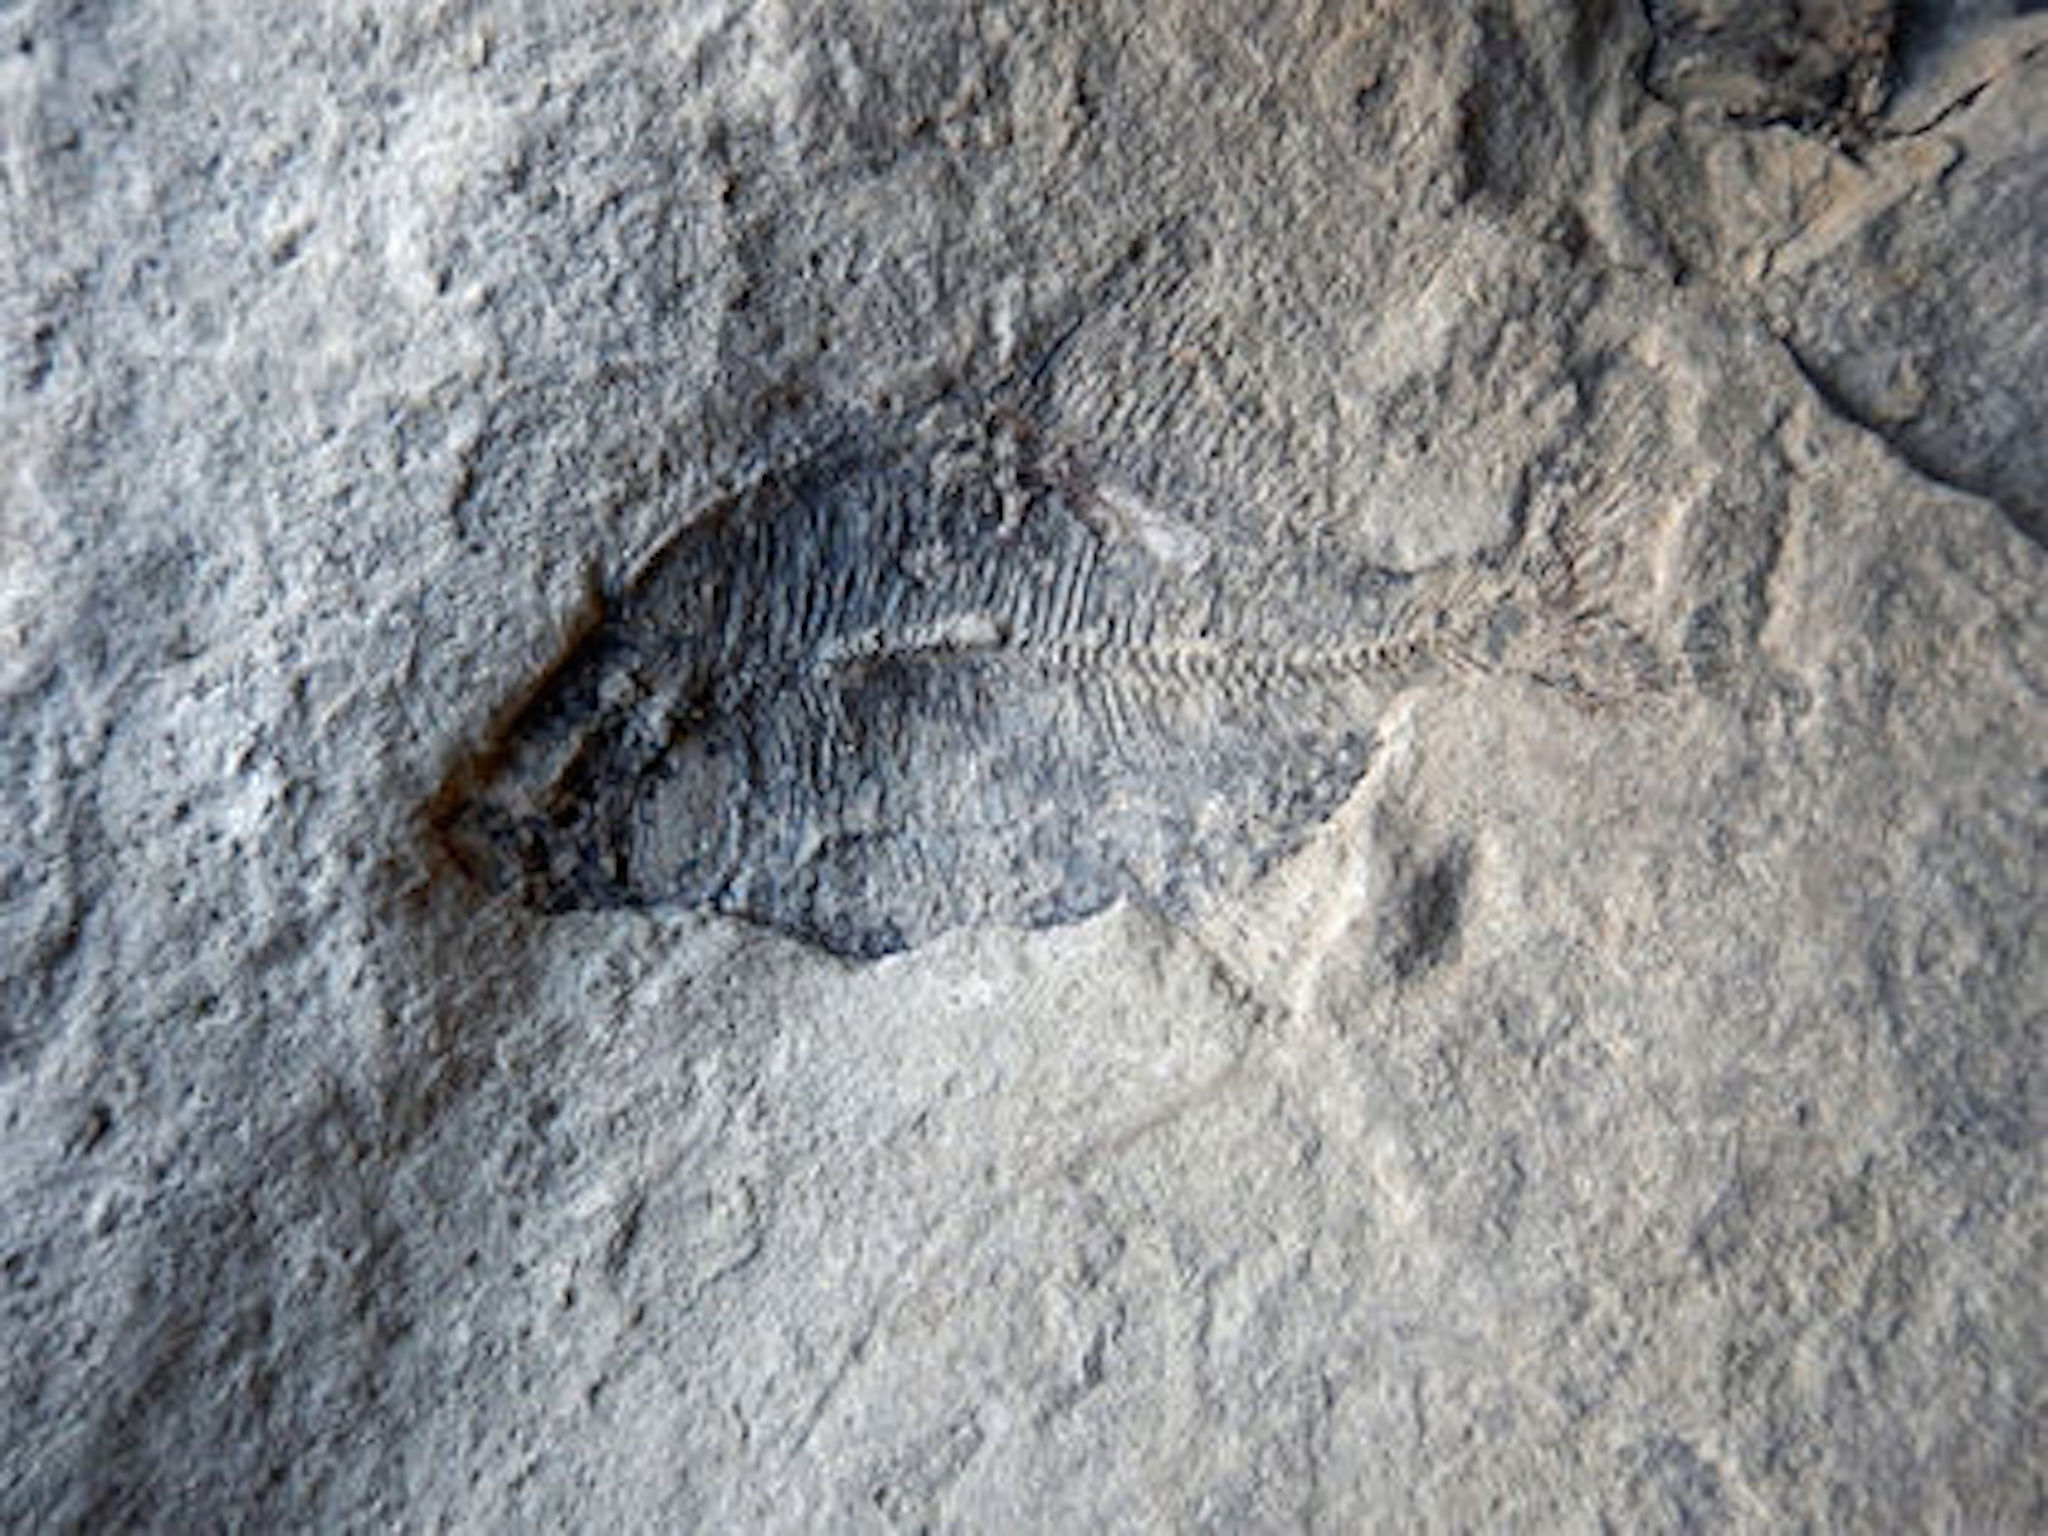 Five fish were found in a block of sandstone in the Paskapoo Formation